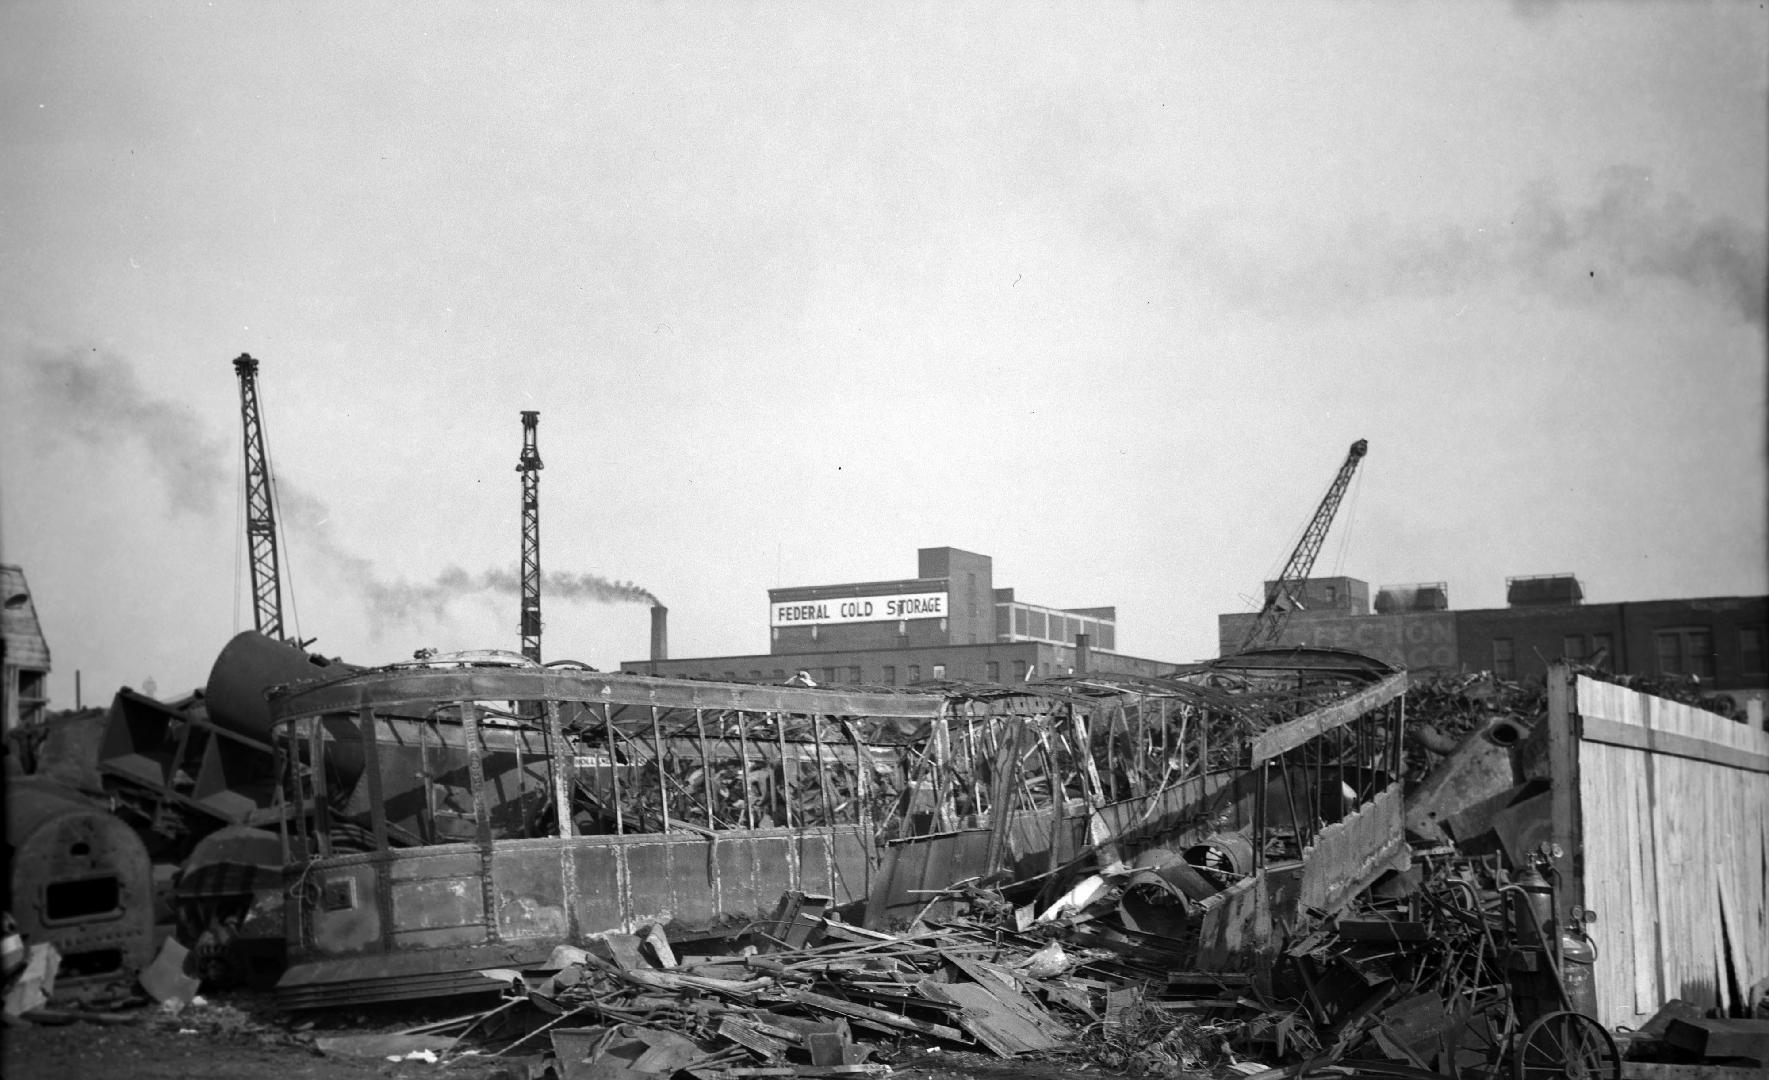 T.T.C., #2968 (at left), burnt for scrap at Western Iron & Metal Co., Mill St., showing car #2934 at right